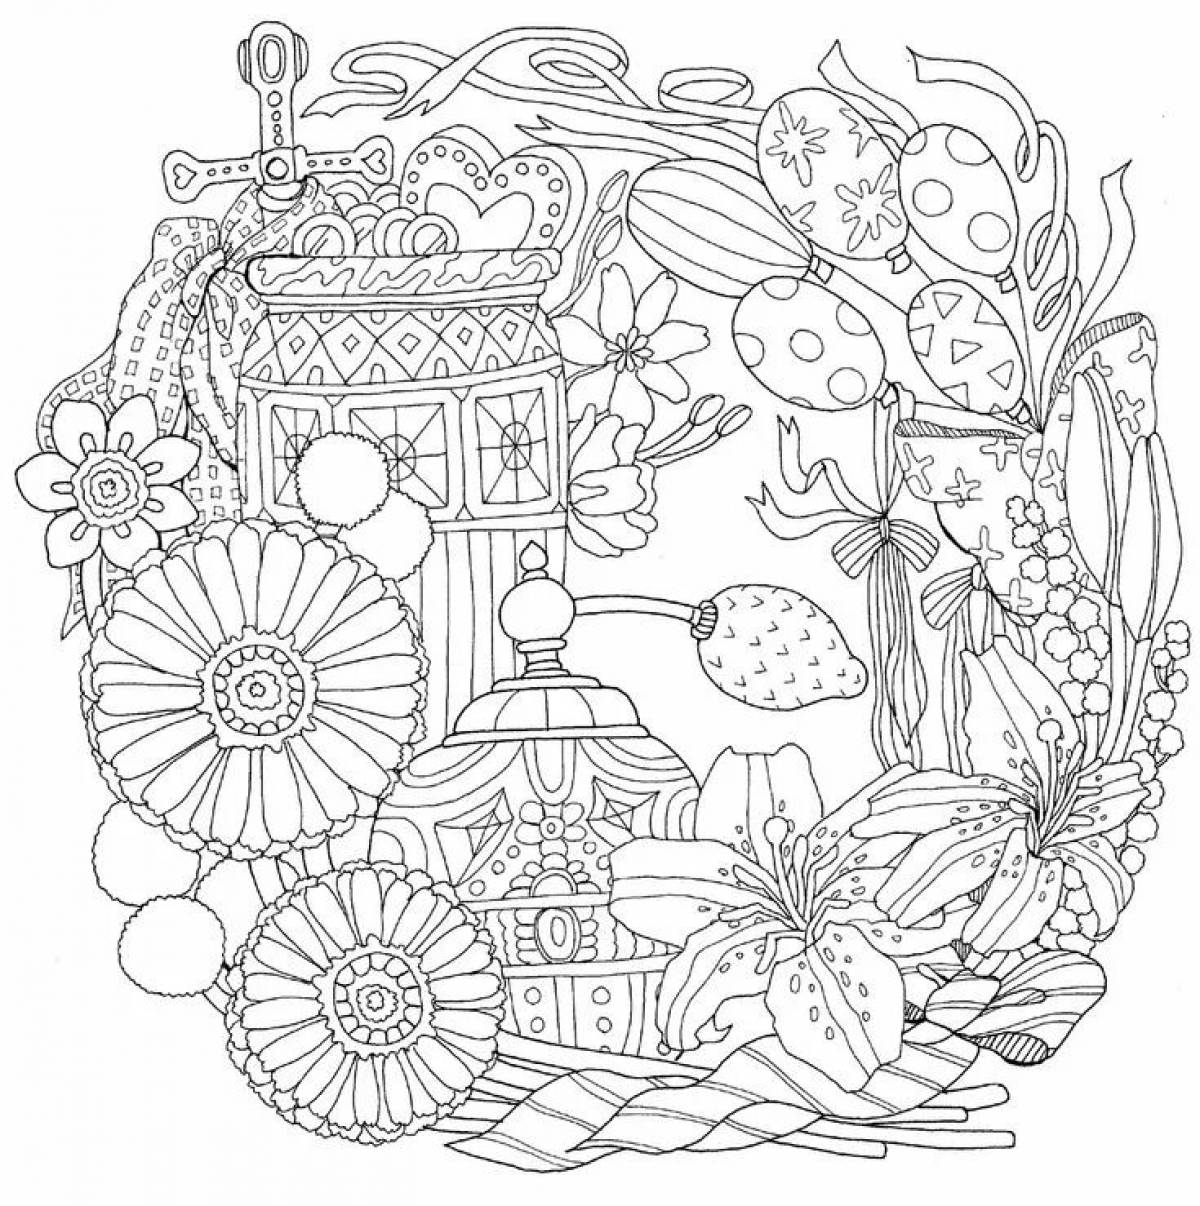 Coloring-inspiration coloring page книжка-раскраска